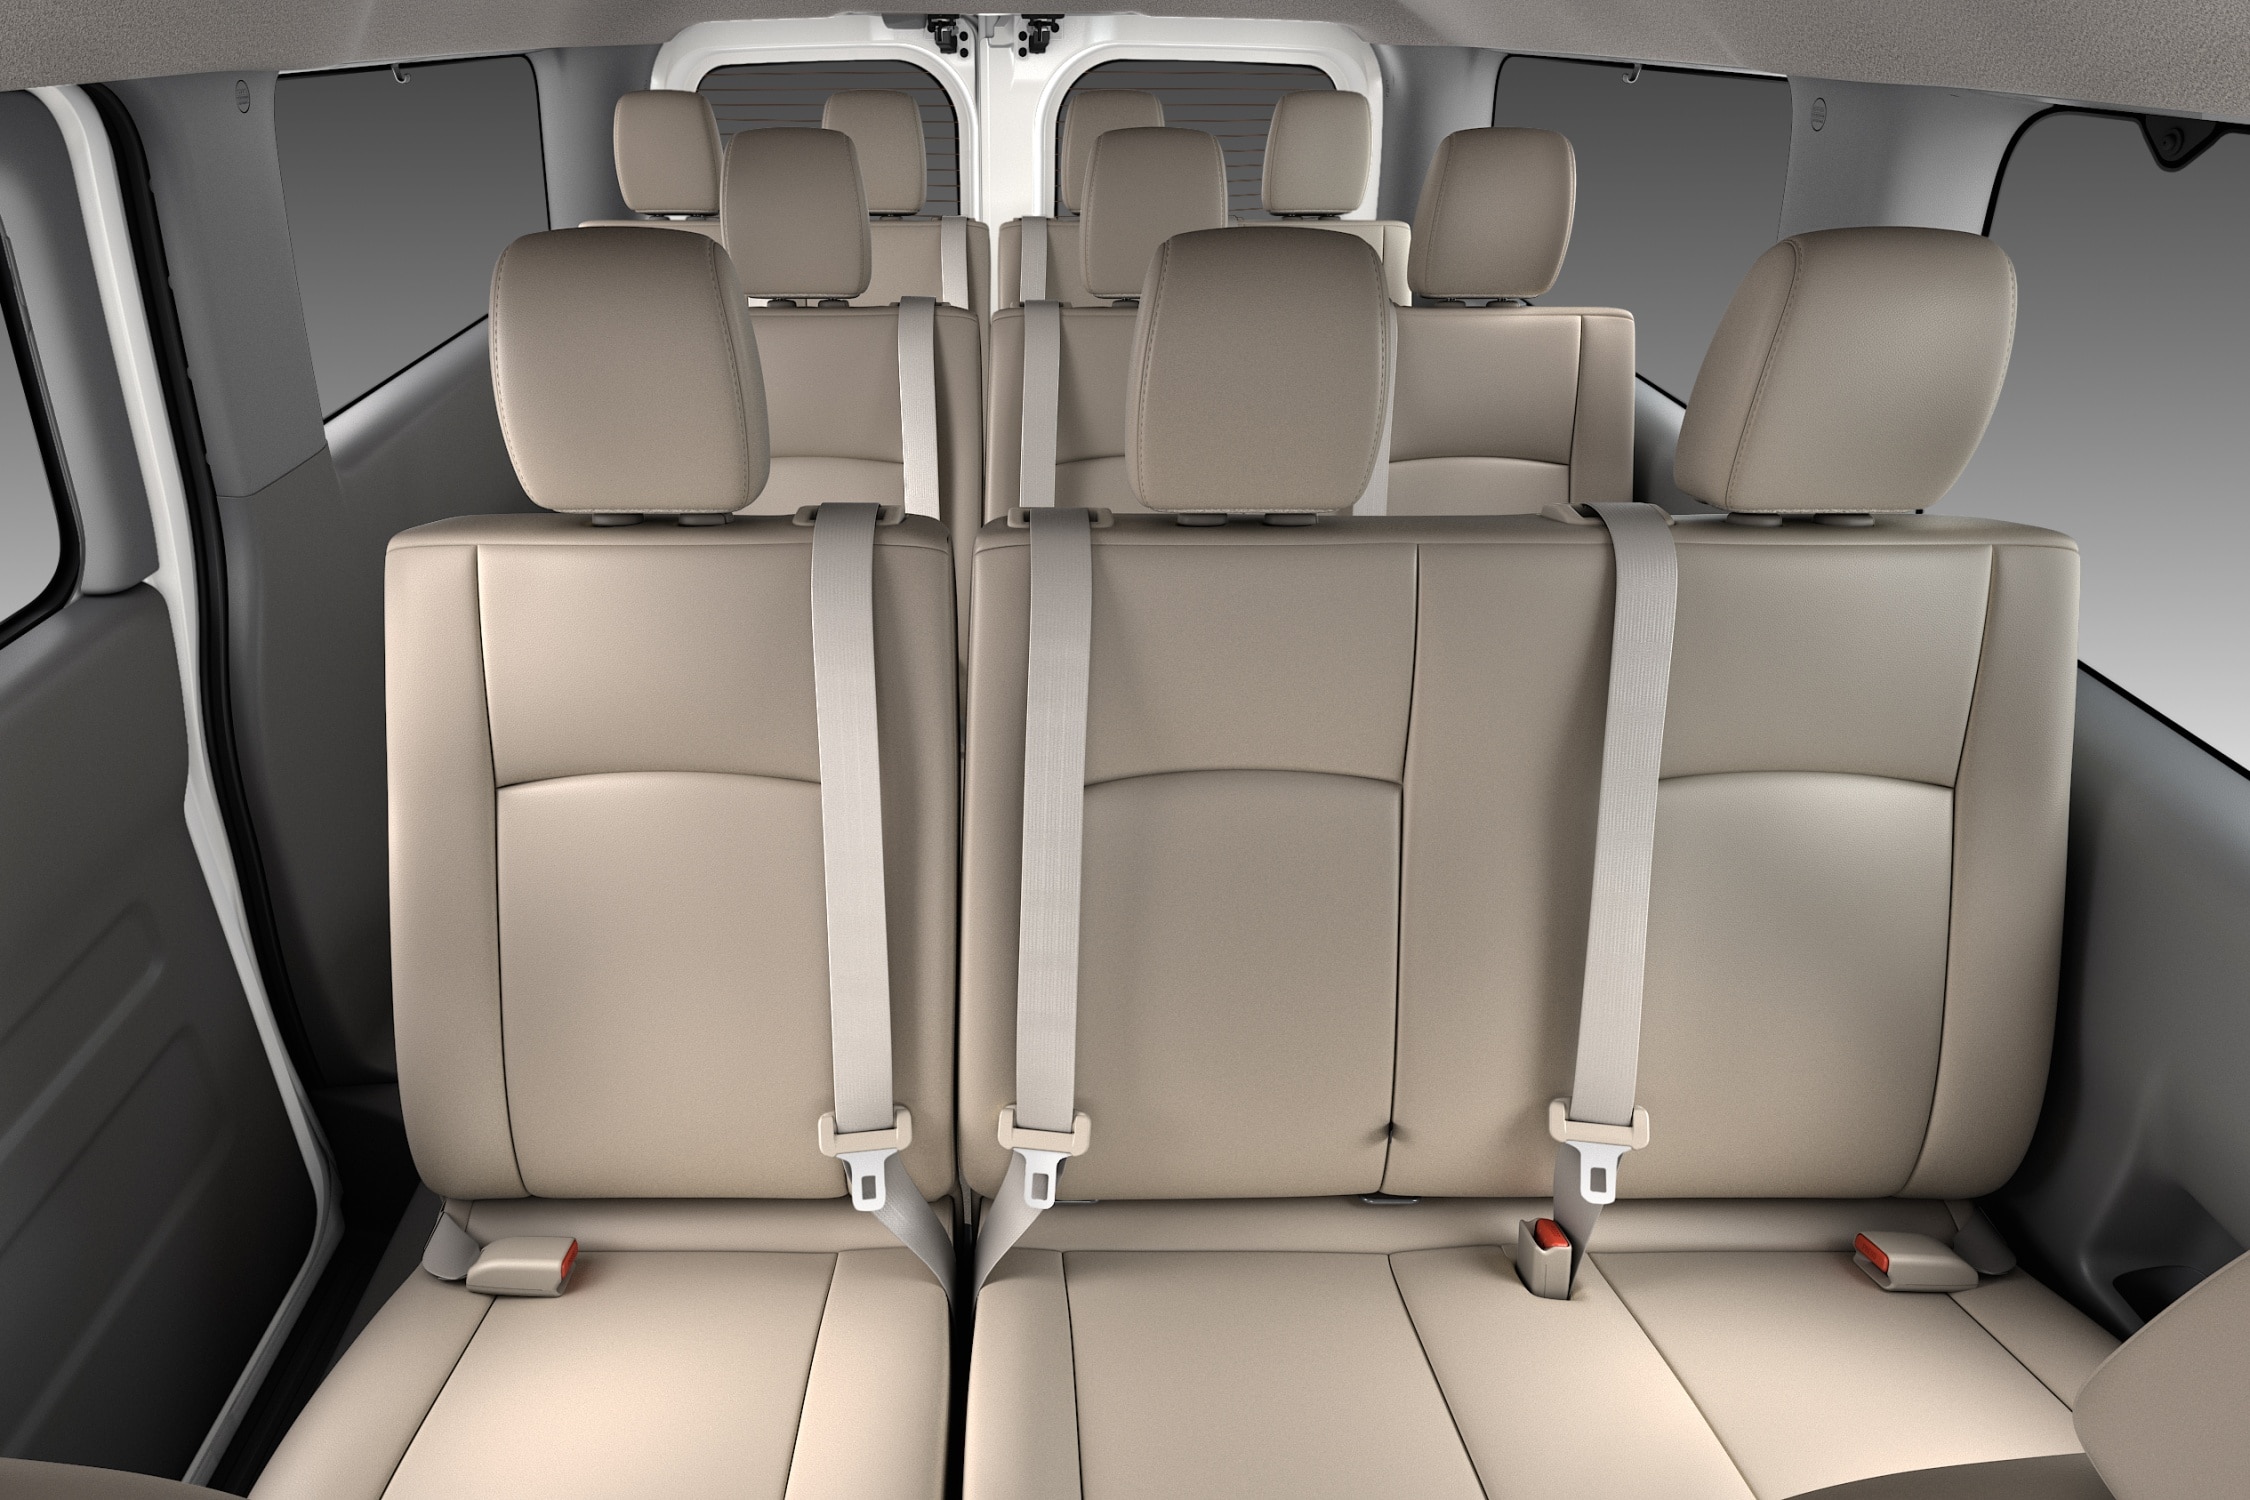 How Many Seats Are in a Minivan 